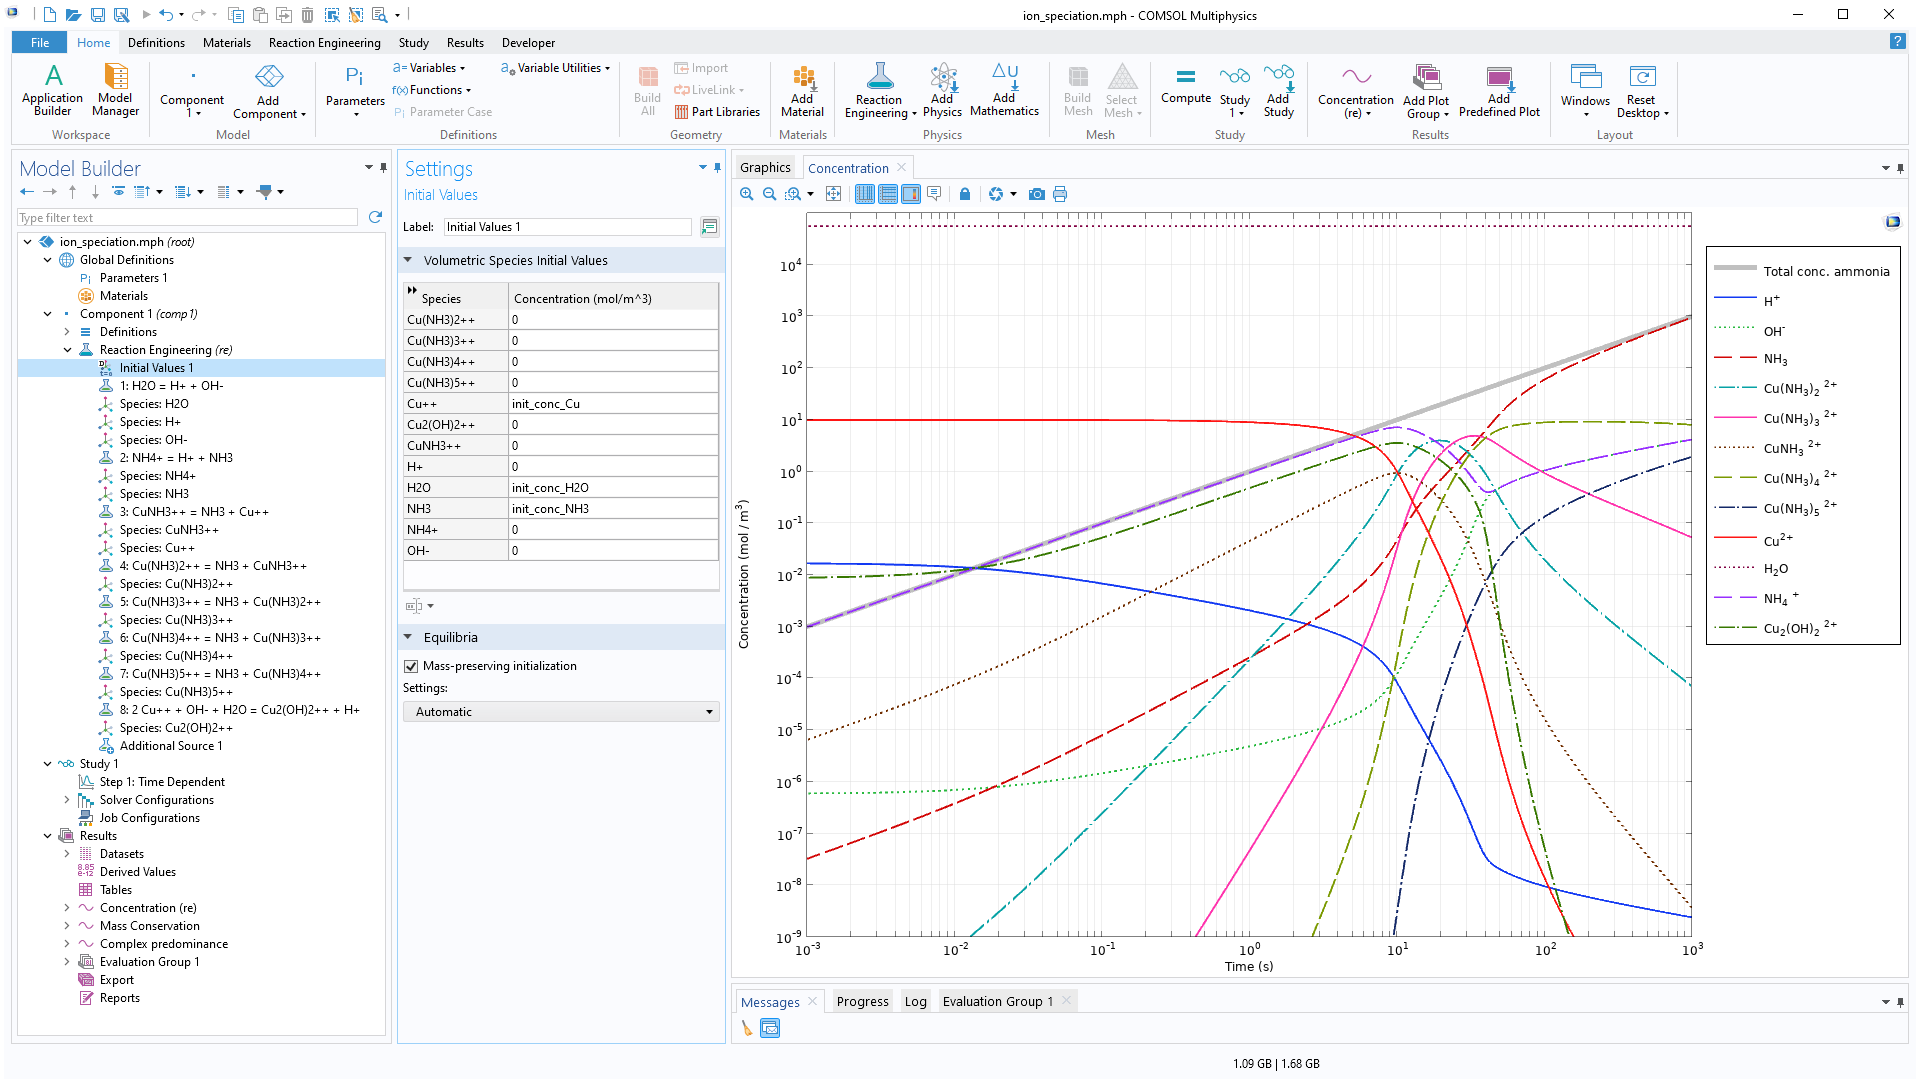 The COMSOL Multiphysics UI showing the Model Builder with the Initial Values node highlighted, the corresponding Settings window, and a 1D plot in the Graphics window.